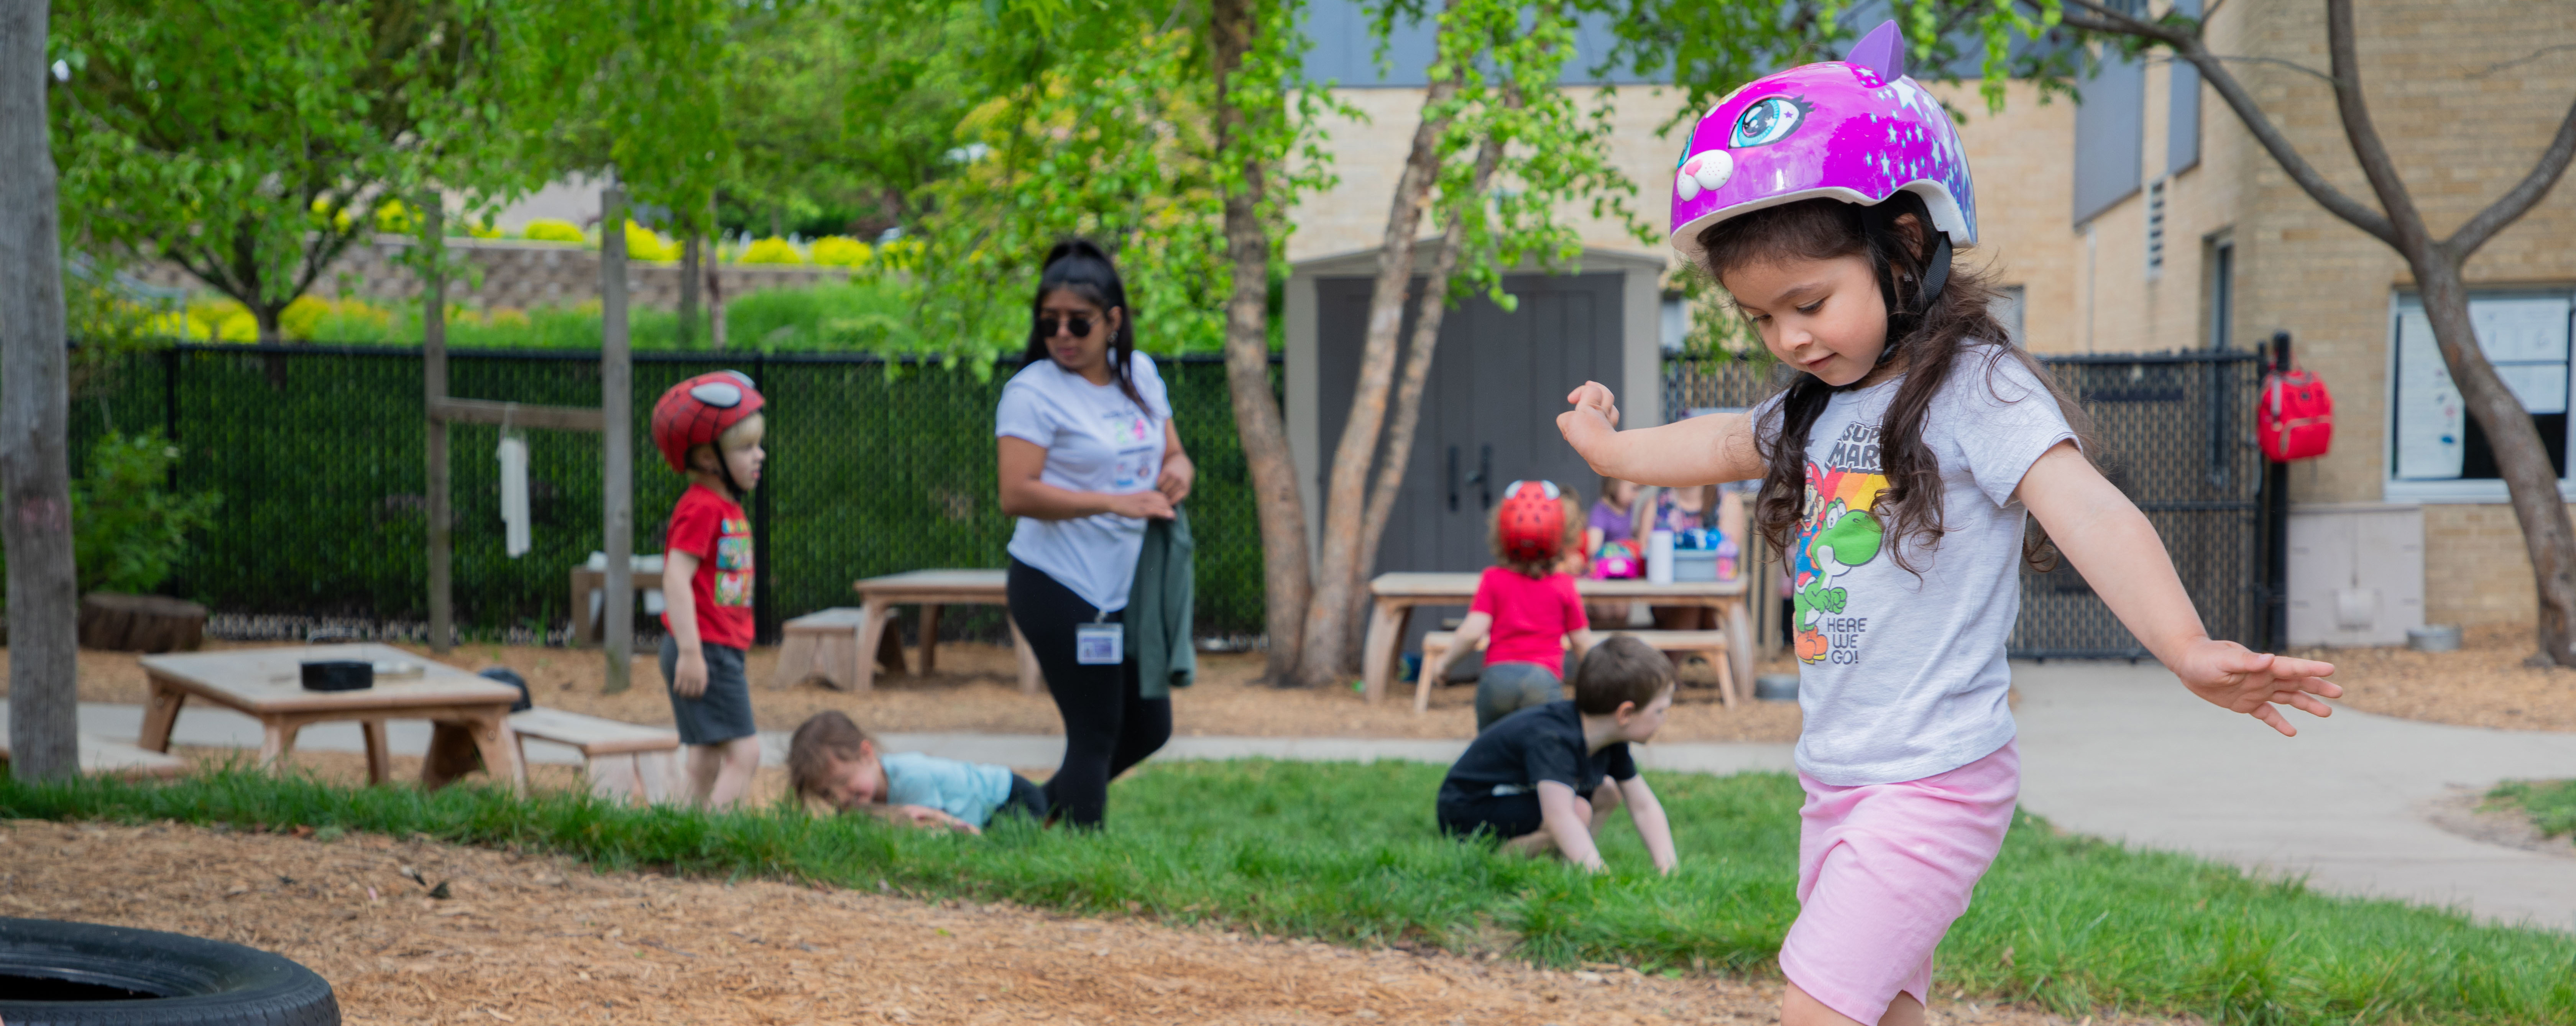 Image of a girl wearing a pink bicycle helmet with other children playing in the background